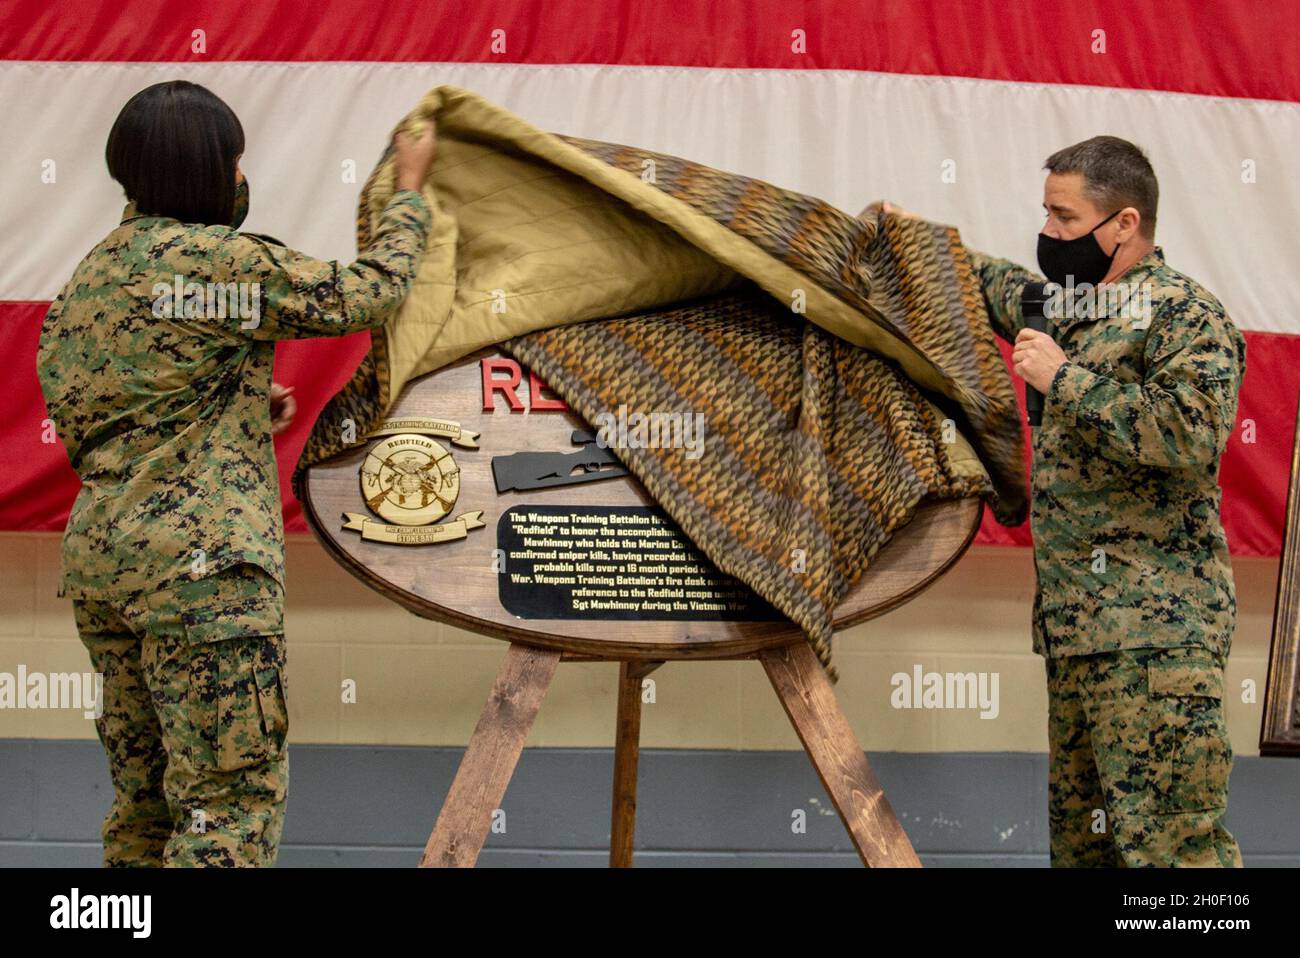 U.S. Marine Corps Lt. Col. NaTasha Everly, left, commanding officer, and Chief Warrant Officer 4 Eric M. Brown, an infantry weapons officer, both with Weapons Training Battalion (WTBN), Marine Corps Installations East-Marine Corps Base Camp Lejeune, unveil the Redfield plaque during a ceremony to establish the call word 'Redfield' for the battalion firing desk on Stone Bay, North Carolina, Feb. 19, 2021. WTBN specializes in marksmanship, selecting the Redfield 3x9x40 scope for its significant historical impacts like it being used by Sgt. Charles 'Chuck' Mawhinney, who holds the Corps' record f Stock Photo